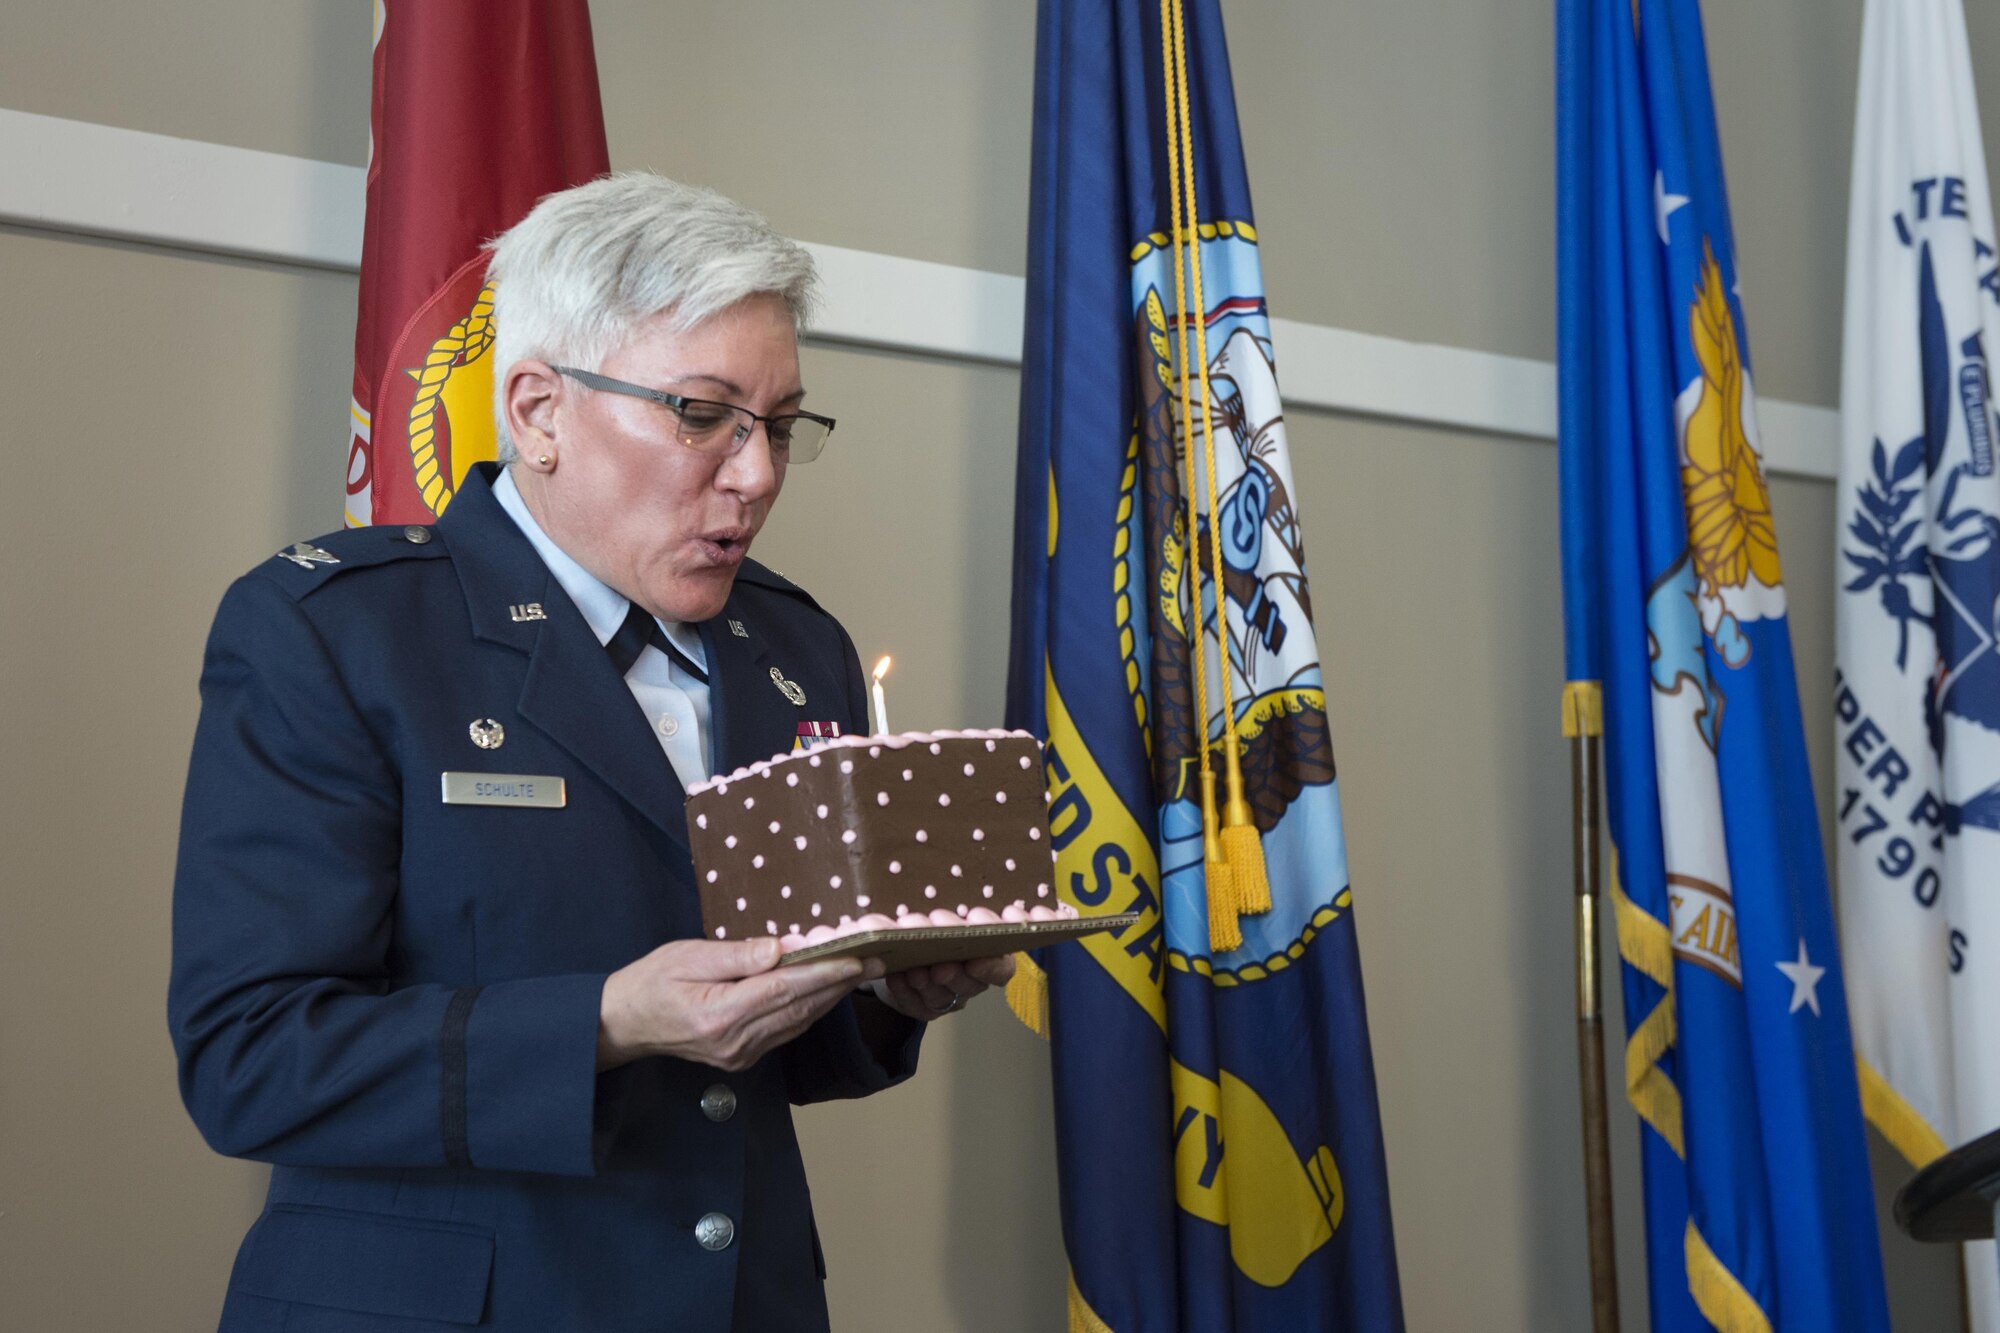 Col. Anna Schulte, 434th Maintenance Group commander, blows out a candle on her birthday cake during the Indiana Woman Veterans’ Conference in Indianapolis, April 15, 2016. Schulte was the key-note speaker for the event that fell on her birthday.  (U.S. Air Force photo/Tech. Sgt. Benjamin Mota)